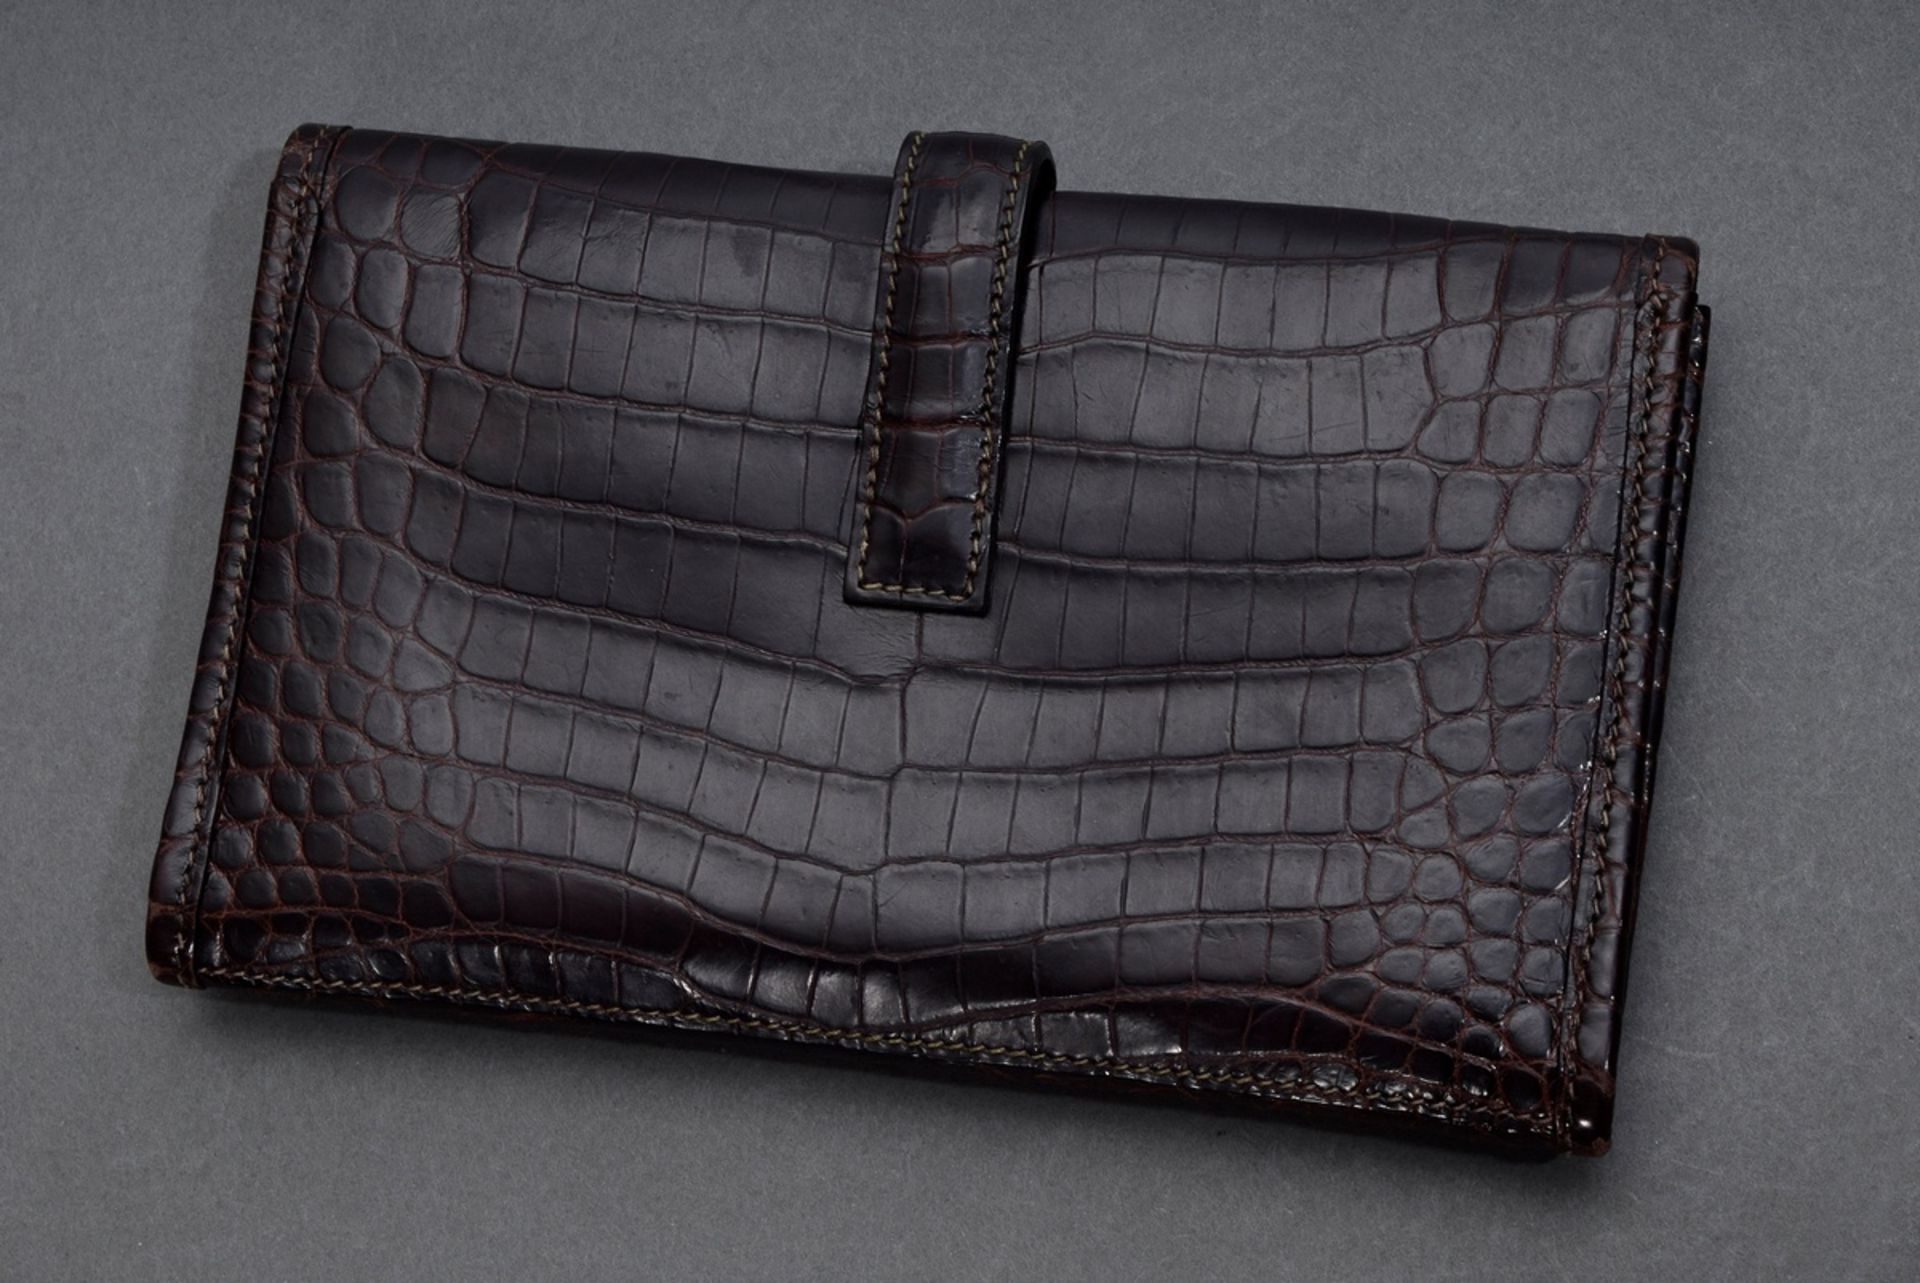 Brown Hermès croco "Jige Clutch" with clasp "H", inscribed: Hermès Paris Made in France", 12.5x19.5 - Image 2 of 5